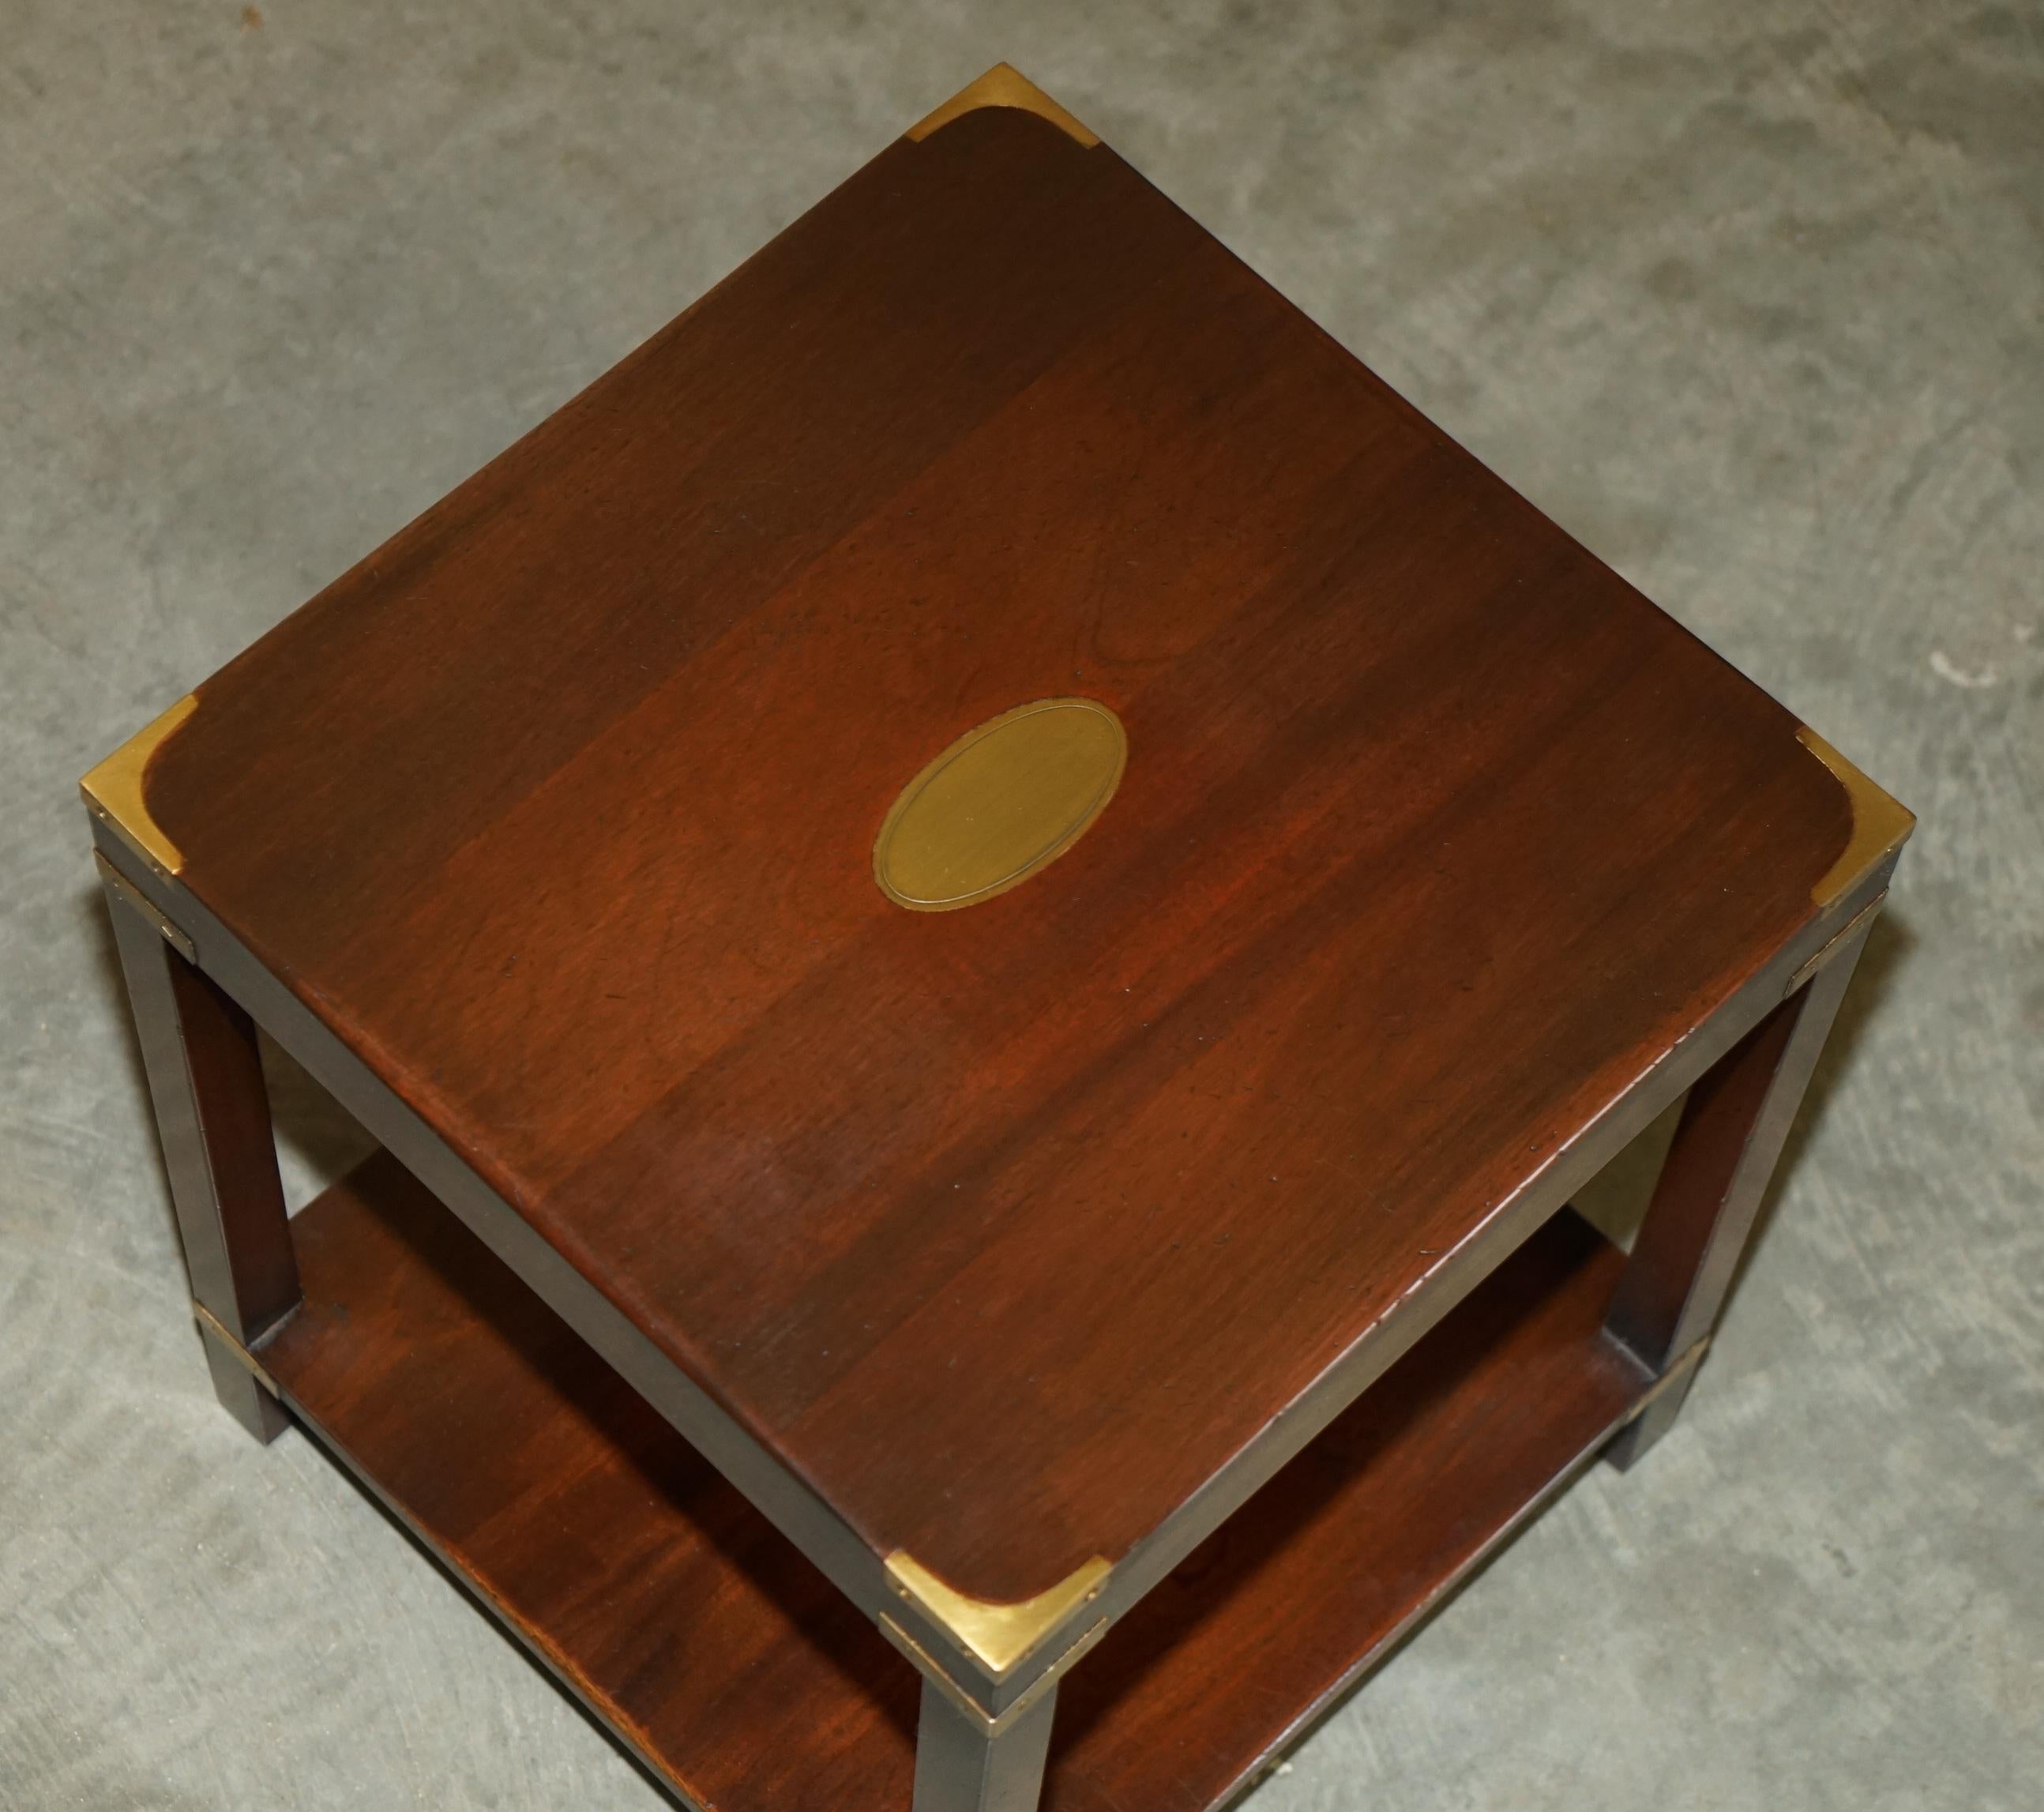 Hand-Crafted LUXURY HARRODS LONDON KENNEDY MILITARY CAMPAIGN HiGH SIDE END TABLE HARDWOOD For Sale